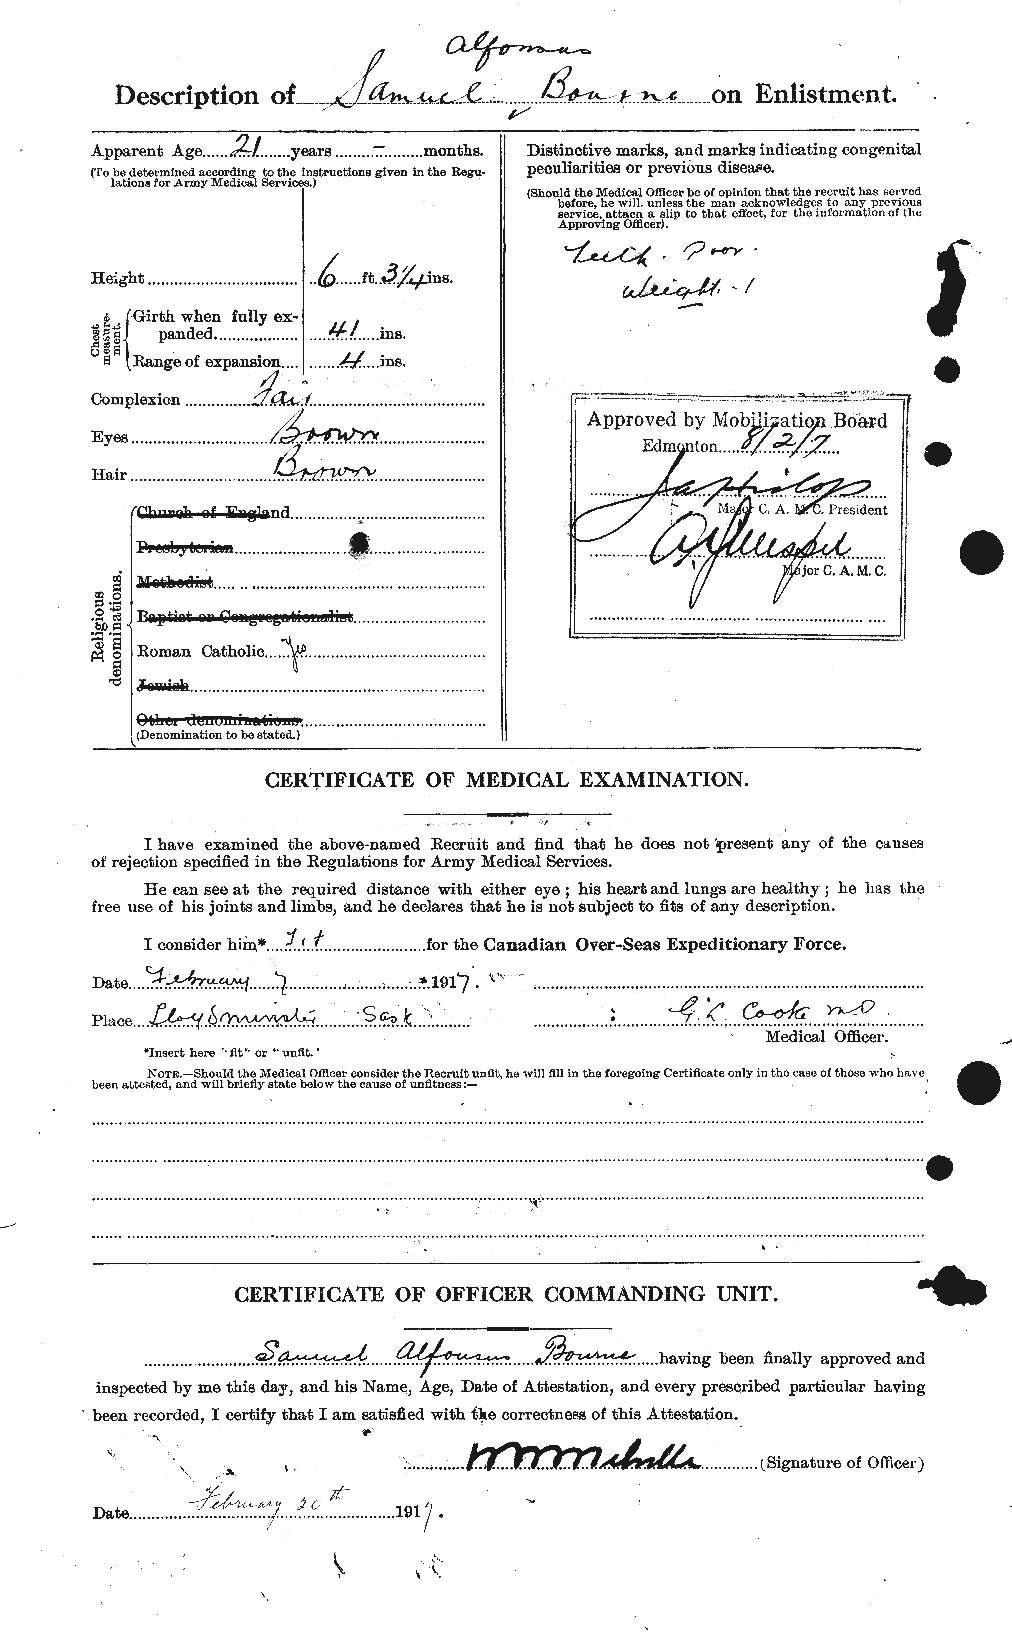 Personnel Records of the First World War - CEF 254147b